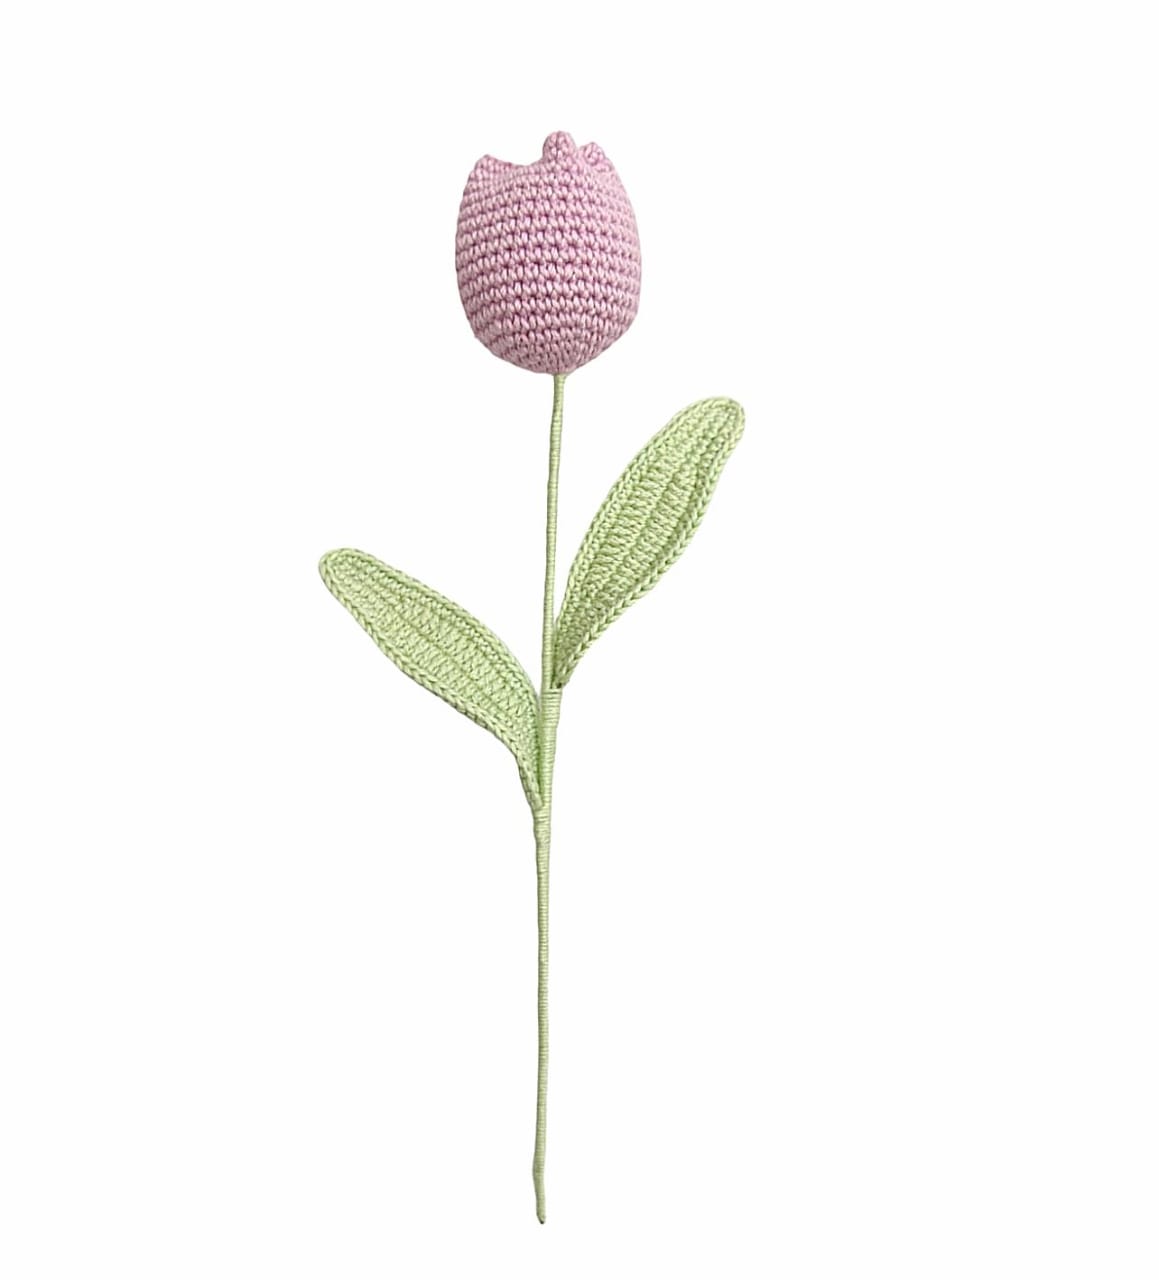 Handcrafted Crochet Tulips :Quaint Charm for Modern Interiors